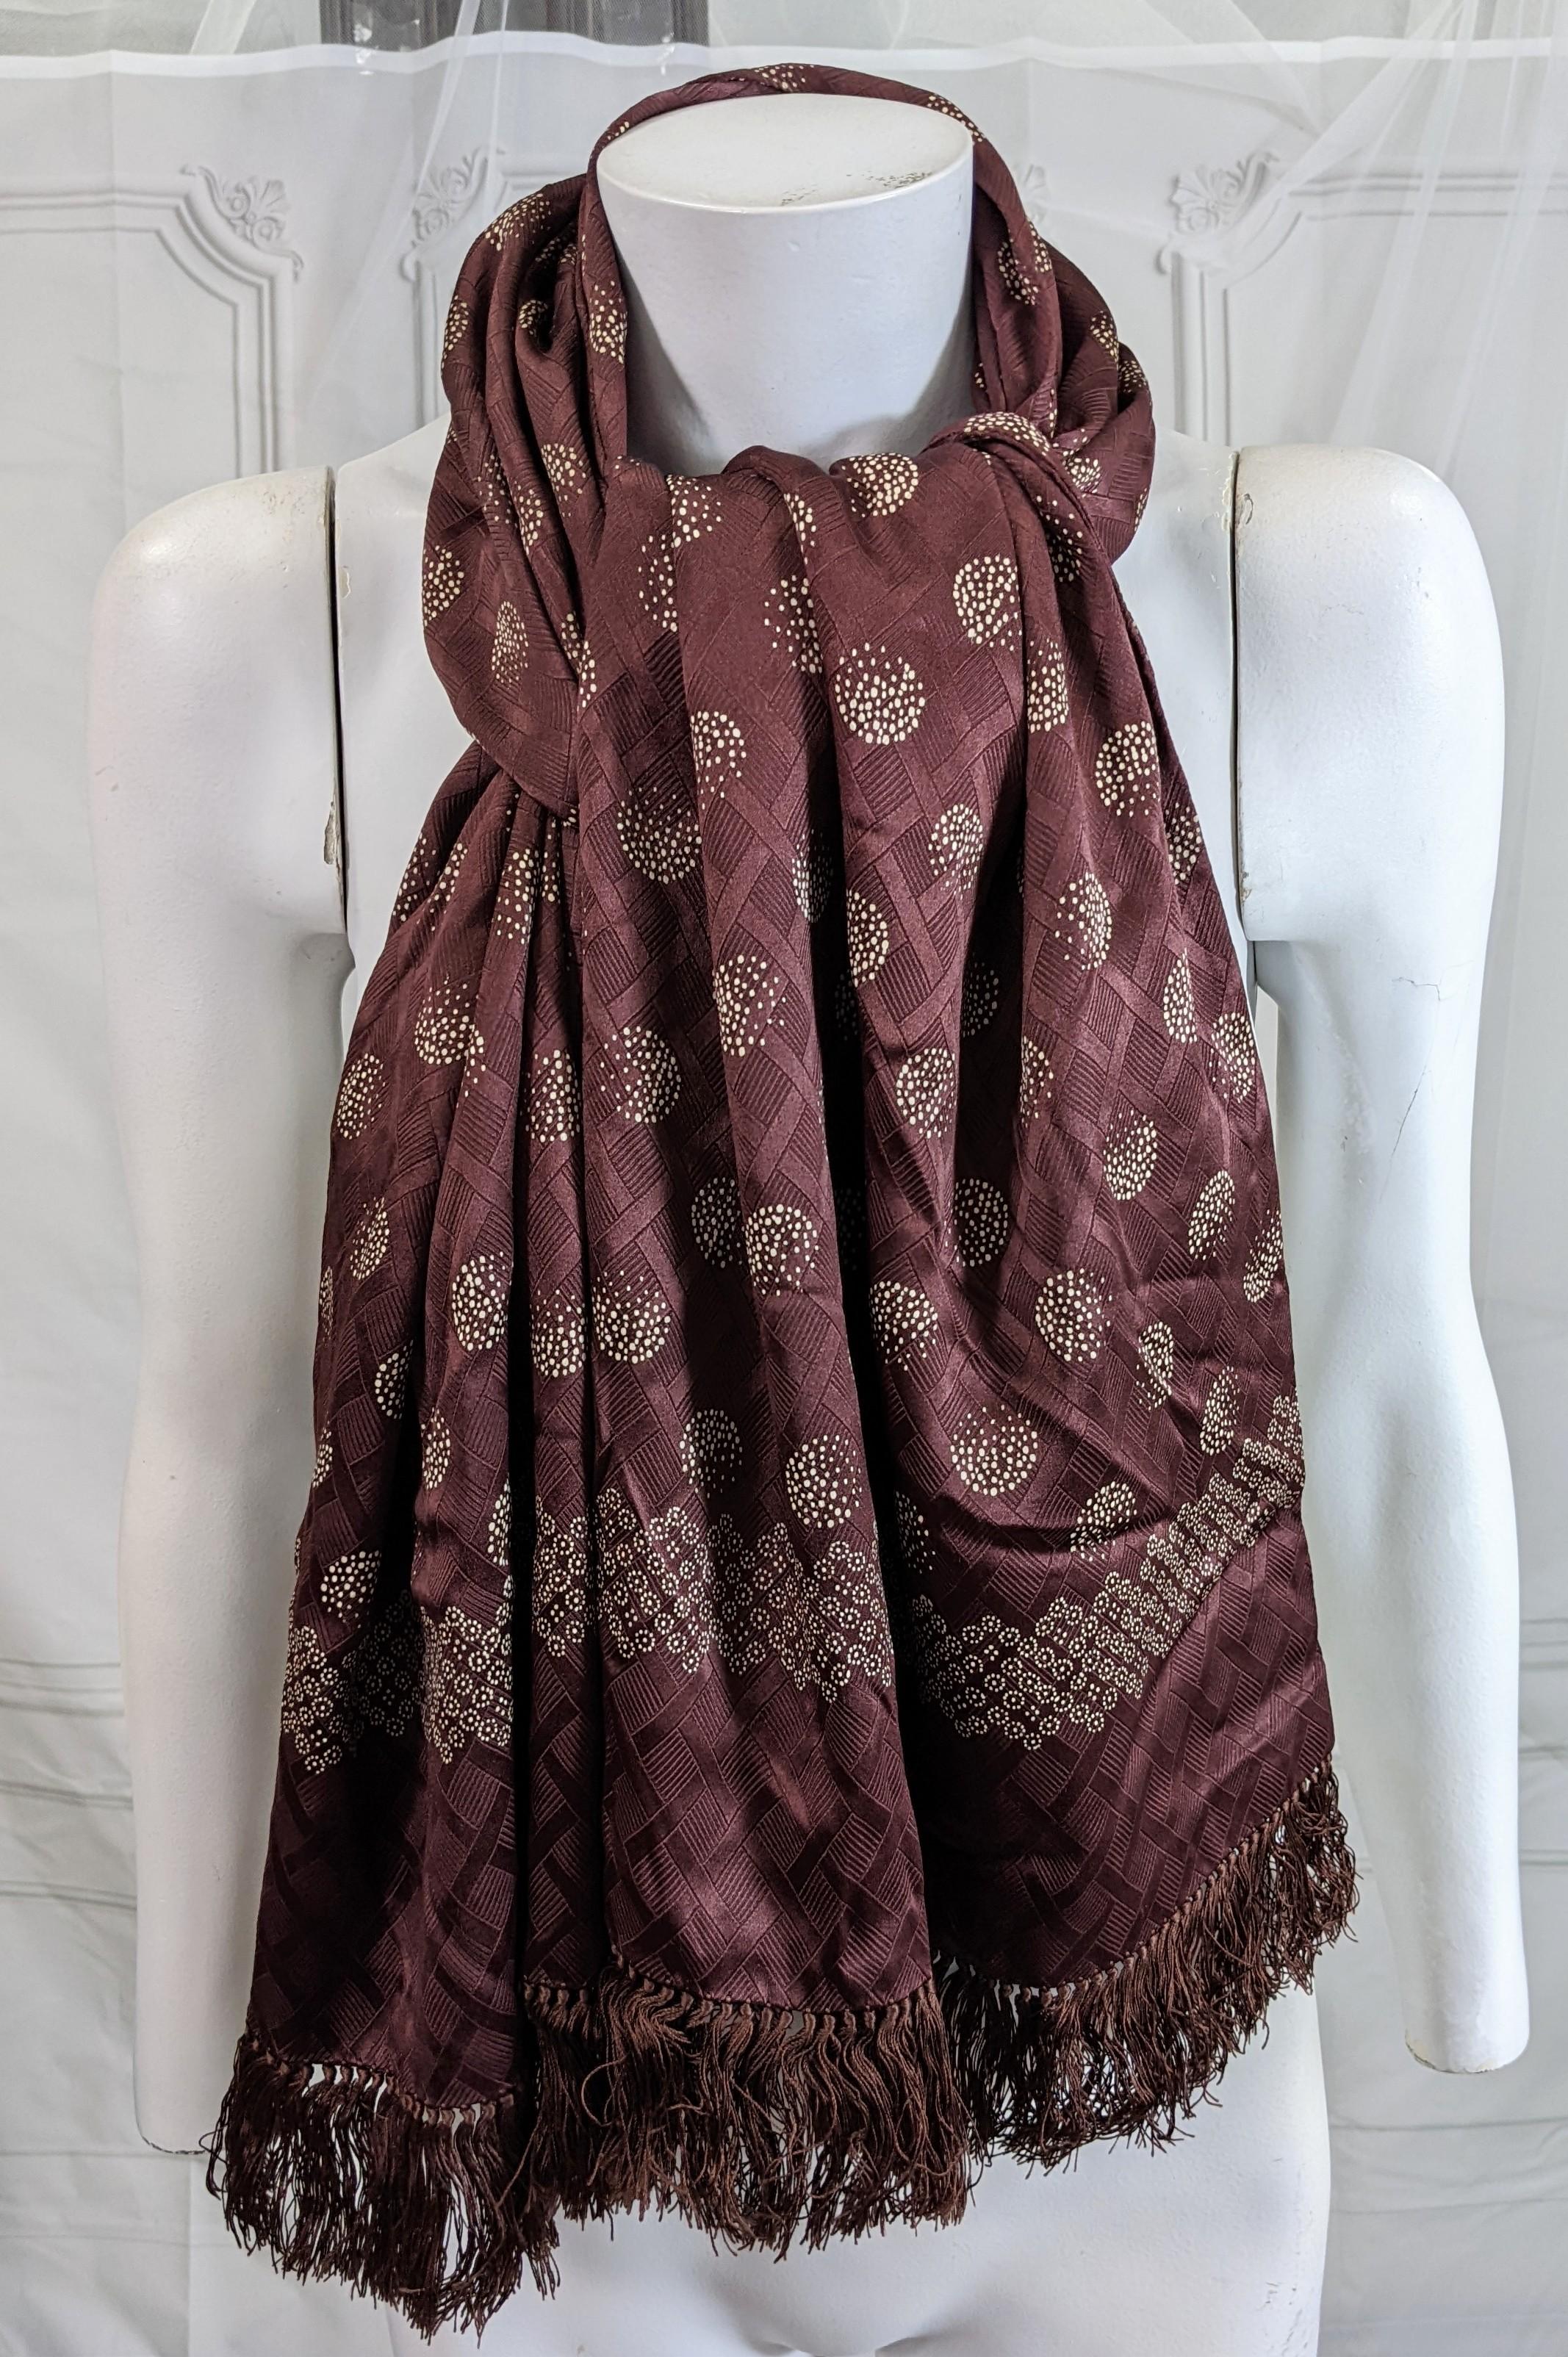 Large, luxurious Art Deco Silk Crepe Print Muffler imported from the UK for Saks Fifth Ave, NY circa 1930. Very rich doubled silk crepe is adorned with hand fringe on ends. A subtle globe print on a jacquard grid base pattern. 
58